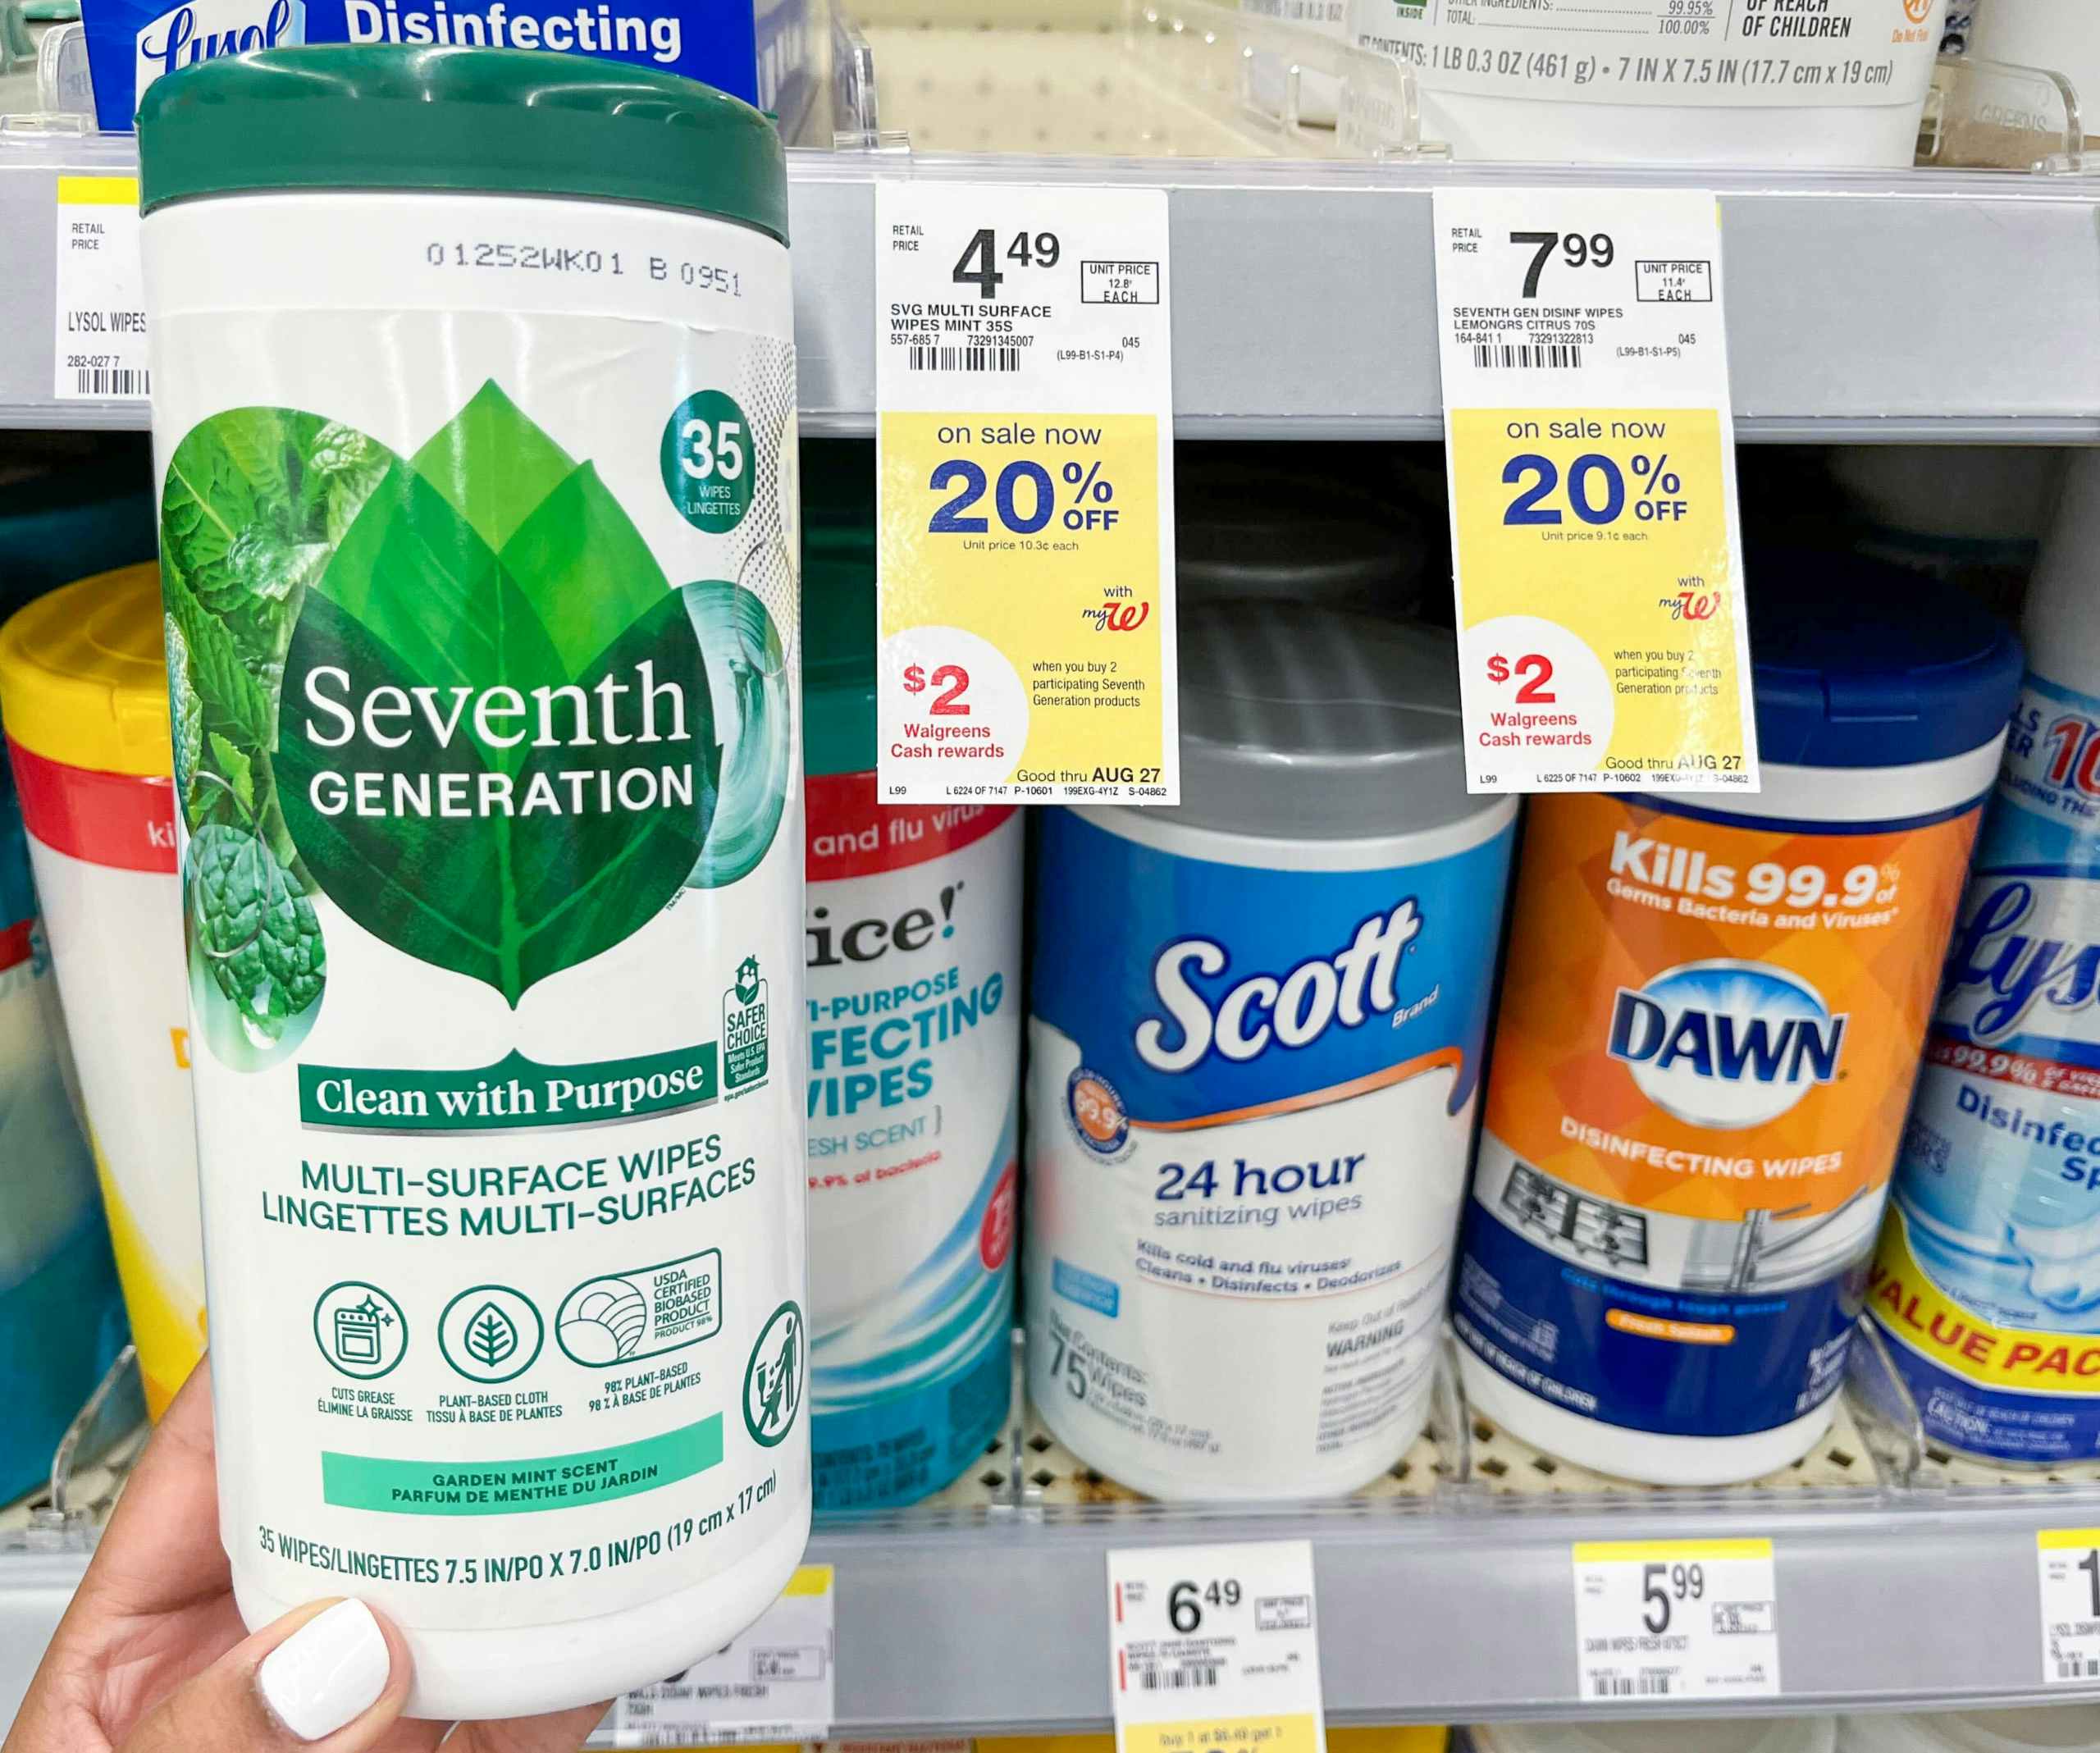 hand holding container of Seventh Generation wipes next to sales tag